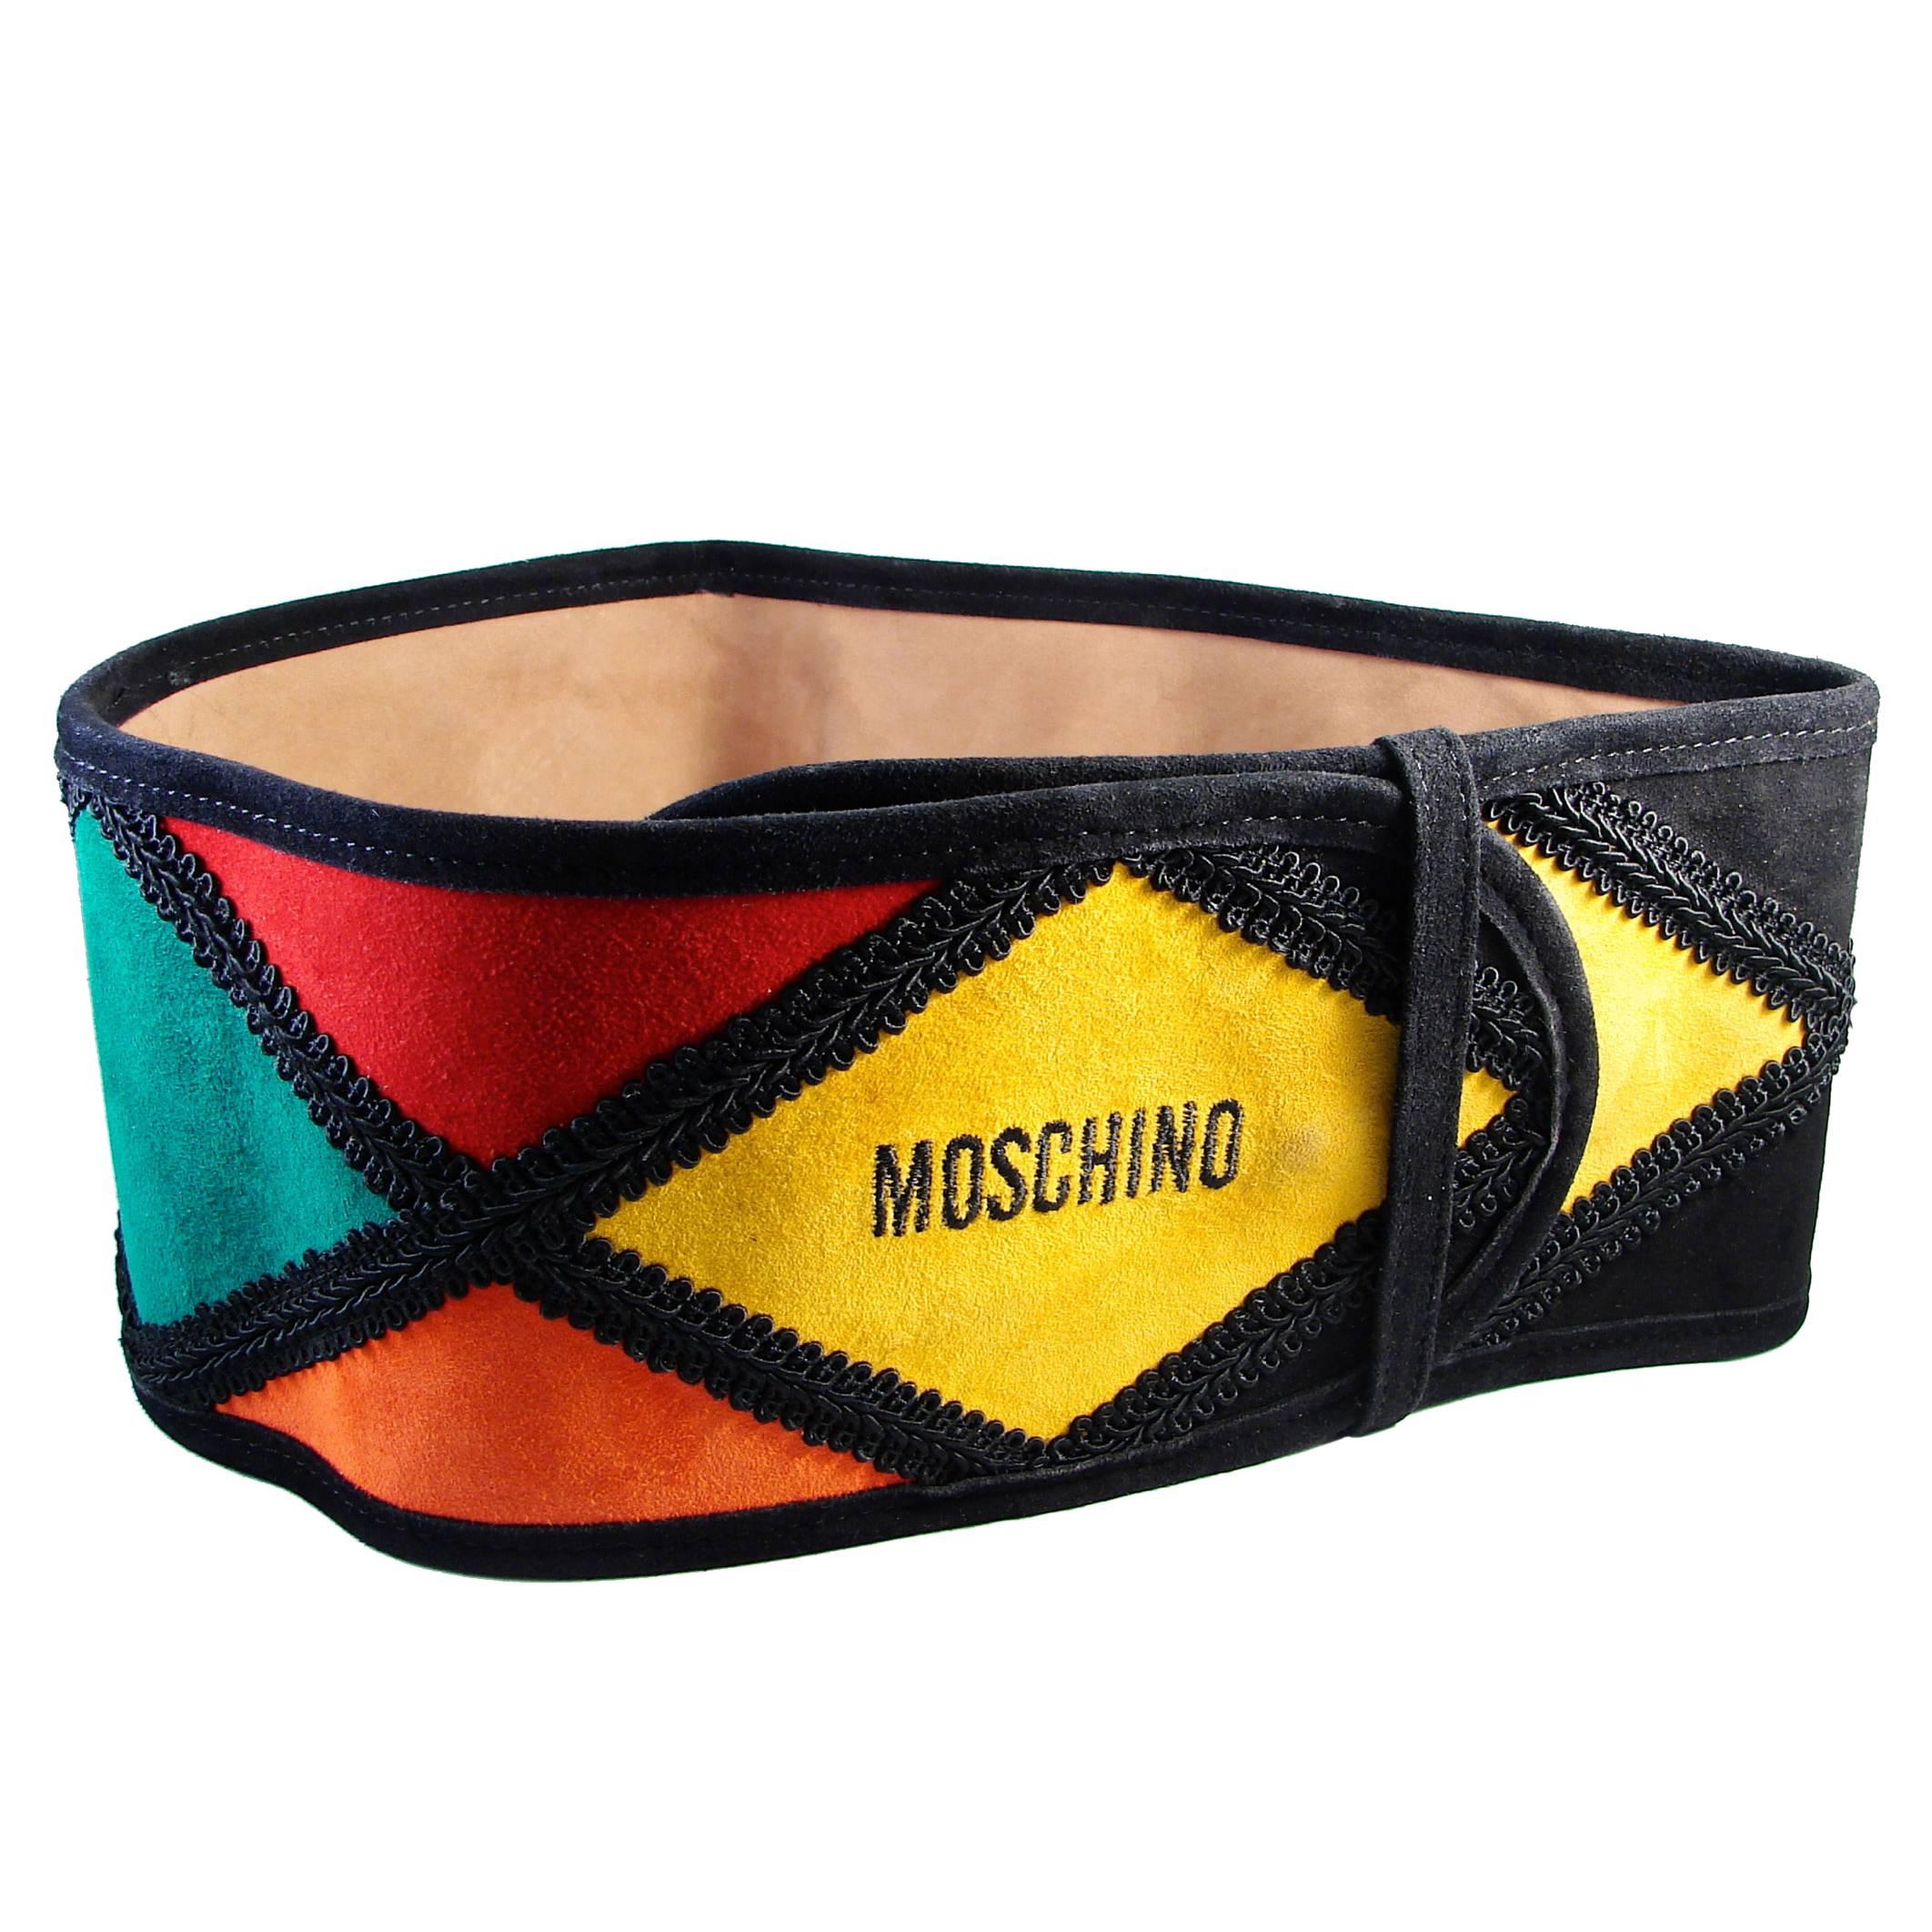 Moschino Wide Belt Colorful Harlequin Patch 4.5" 1980s Size S Rare